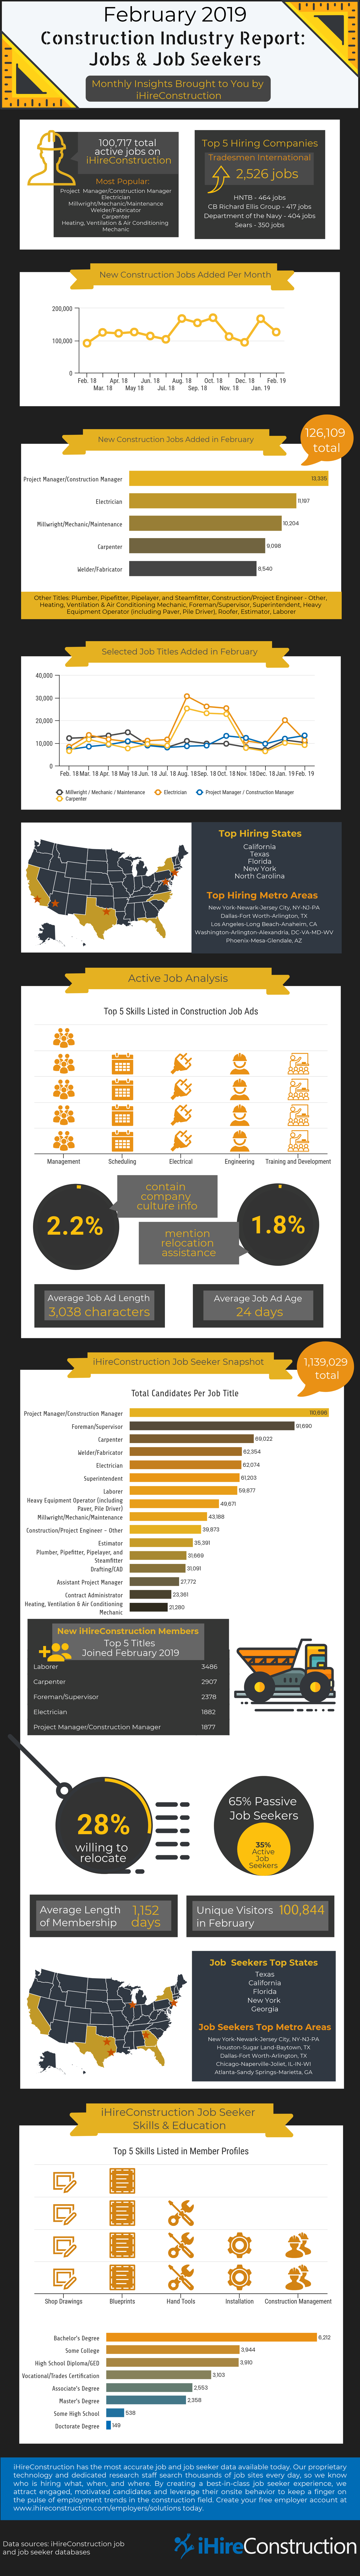 iHireConstruction's February 2019 industry report on construction jobs and job seekers. Infographic.